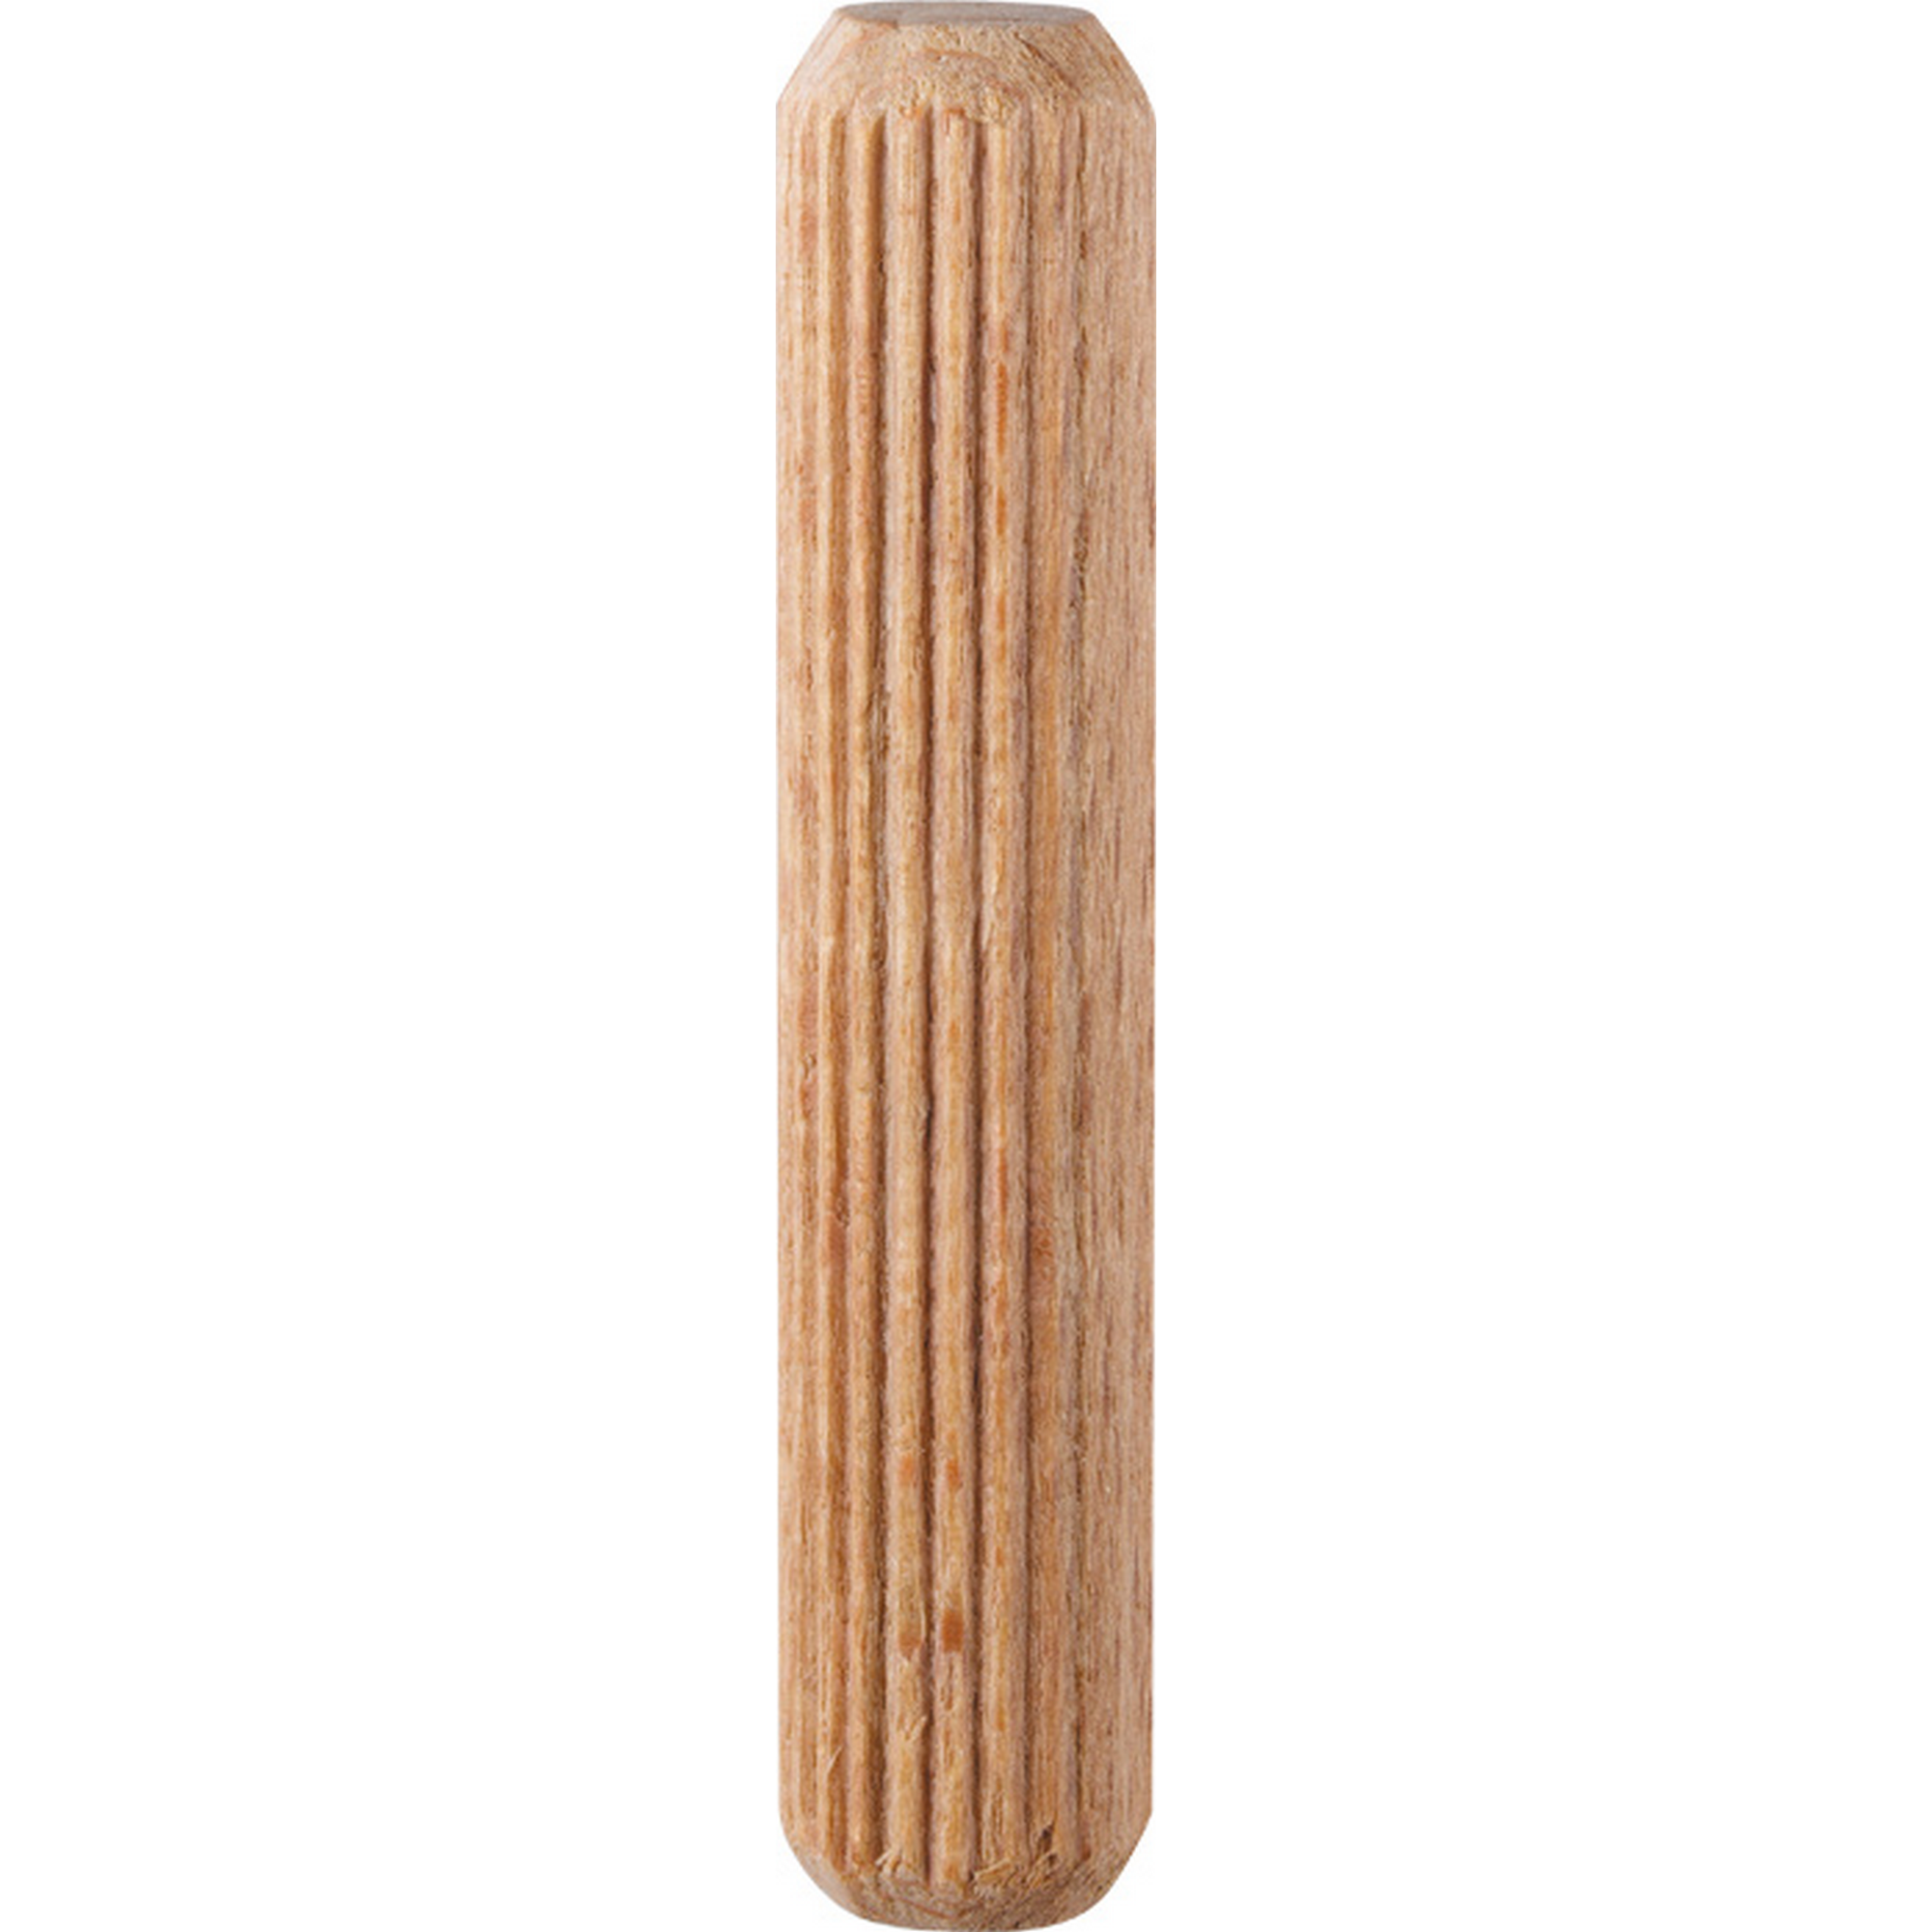 Holzdübel 8 x 40 mm 40 Stück + product picture